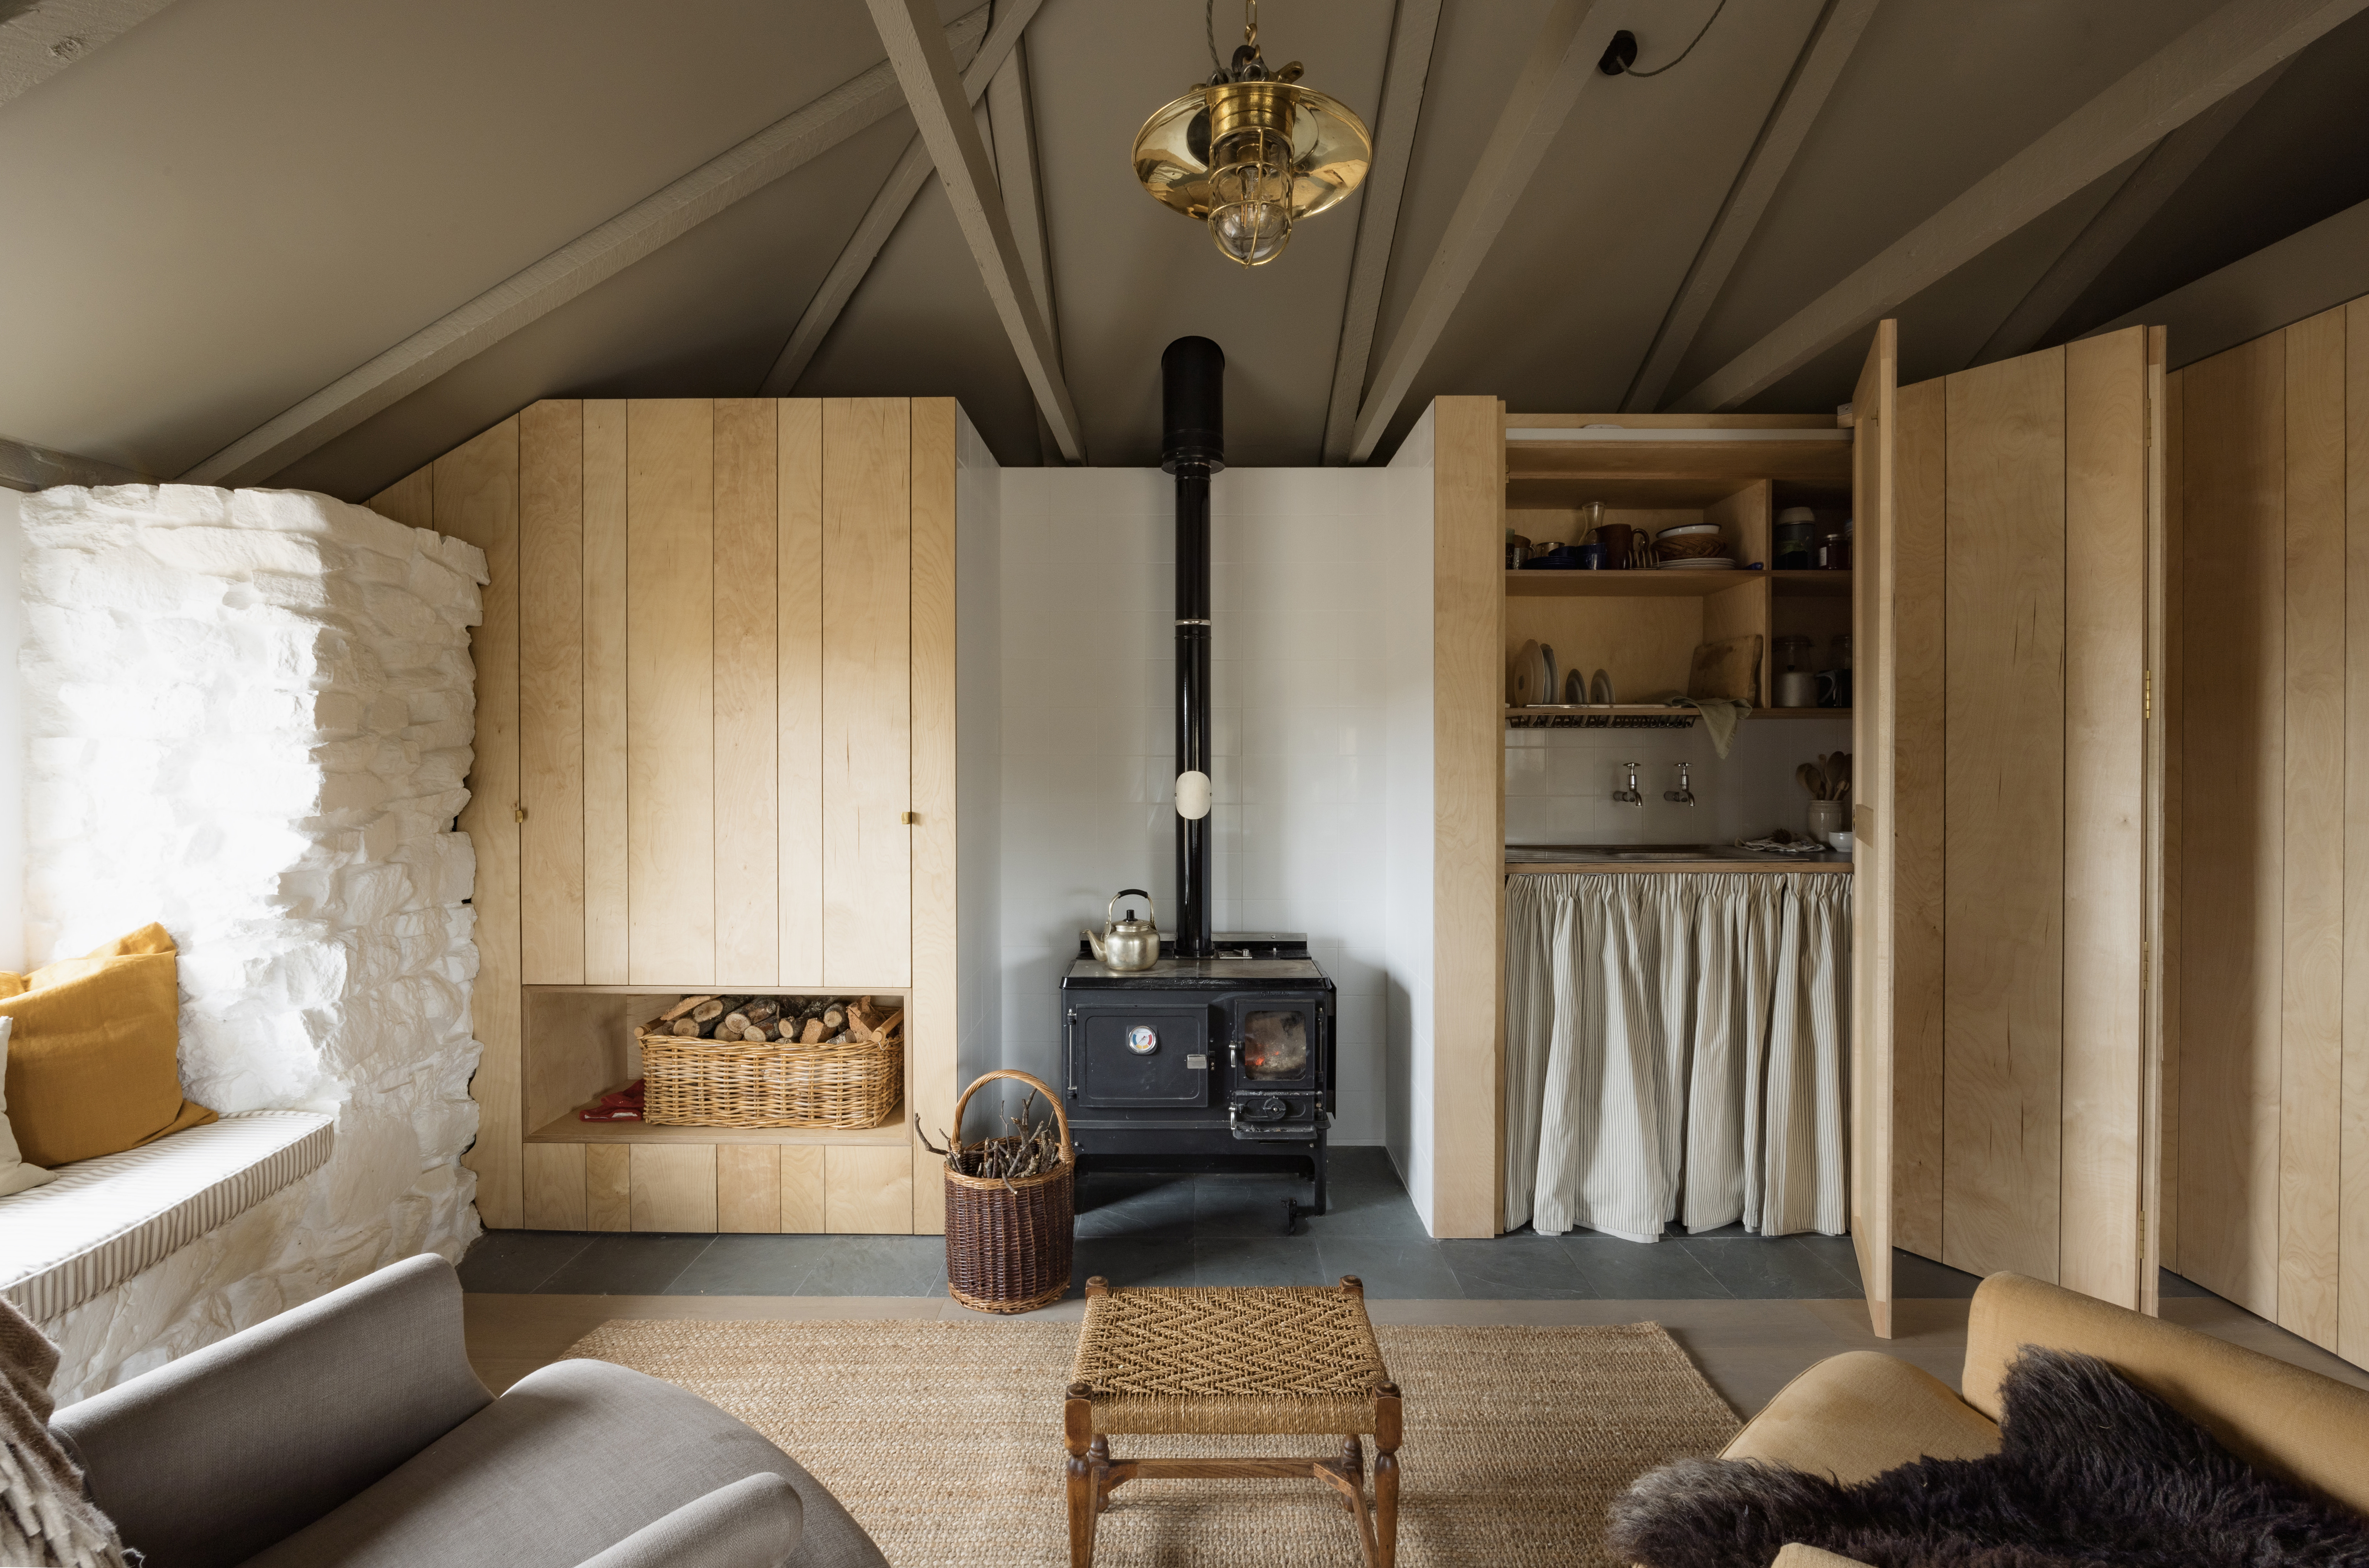 Inside a Cozy Fisherman’s Cottage on Scotland’s Isle of Mull